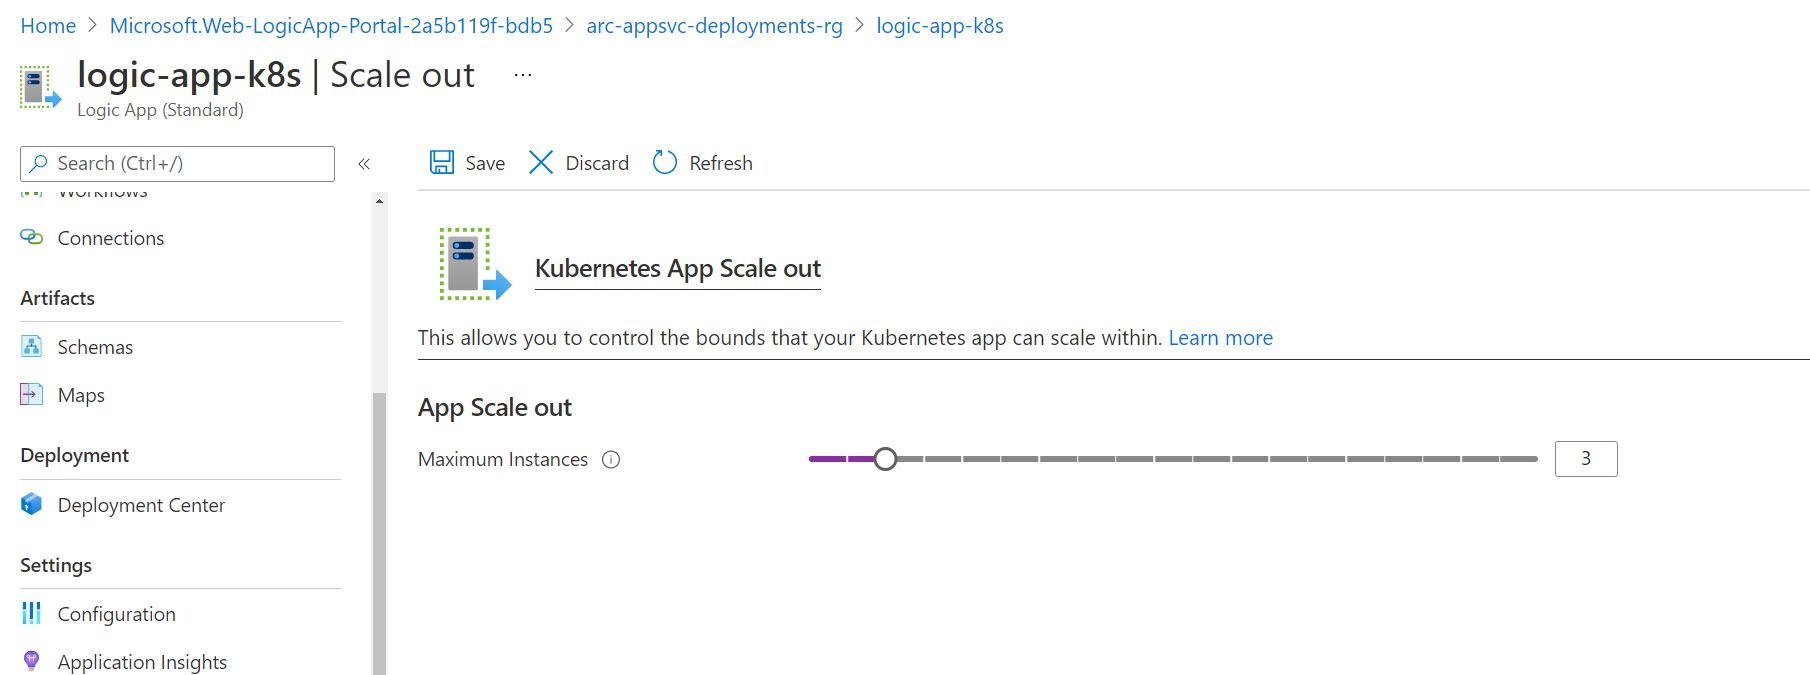 Screenshot showing the Scaling out Functionality for a Logic App hosted in App Service on Kubernetes through Azure Portal